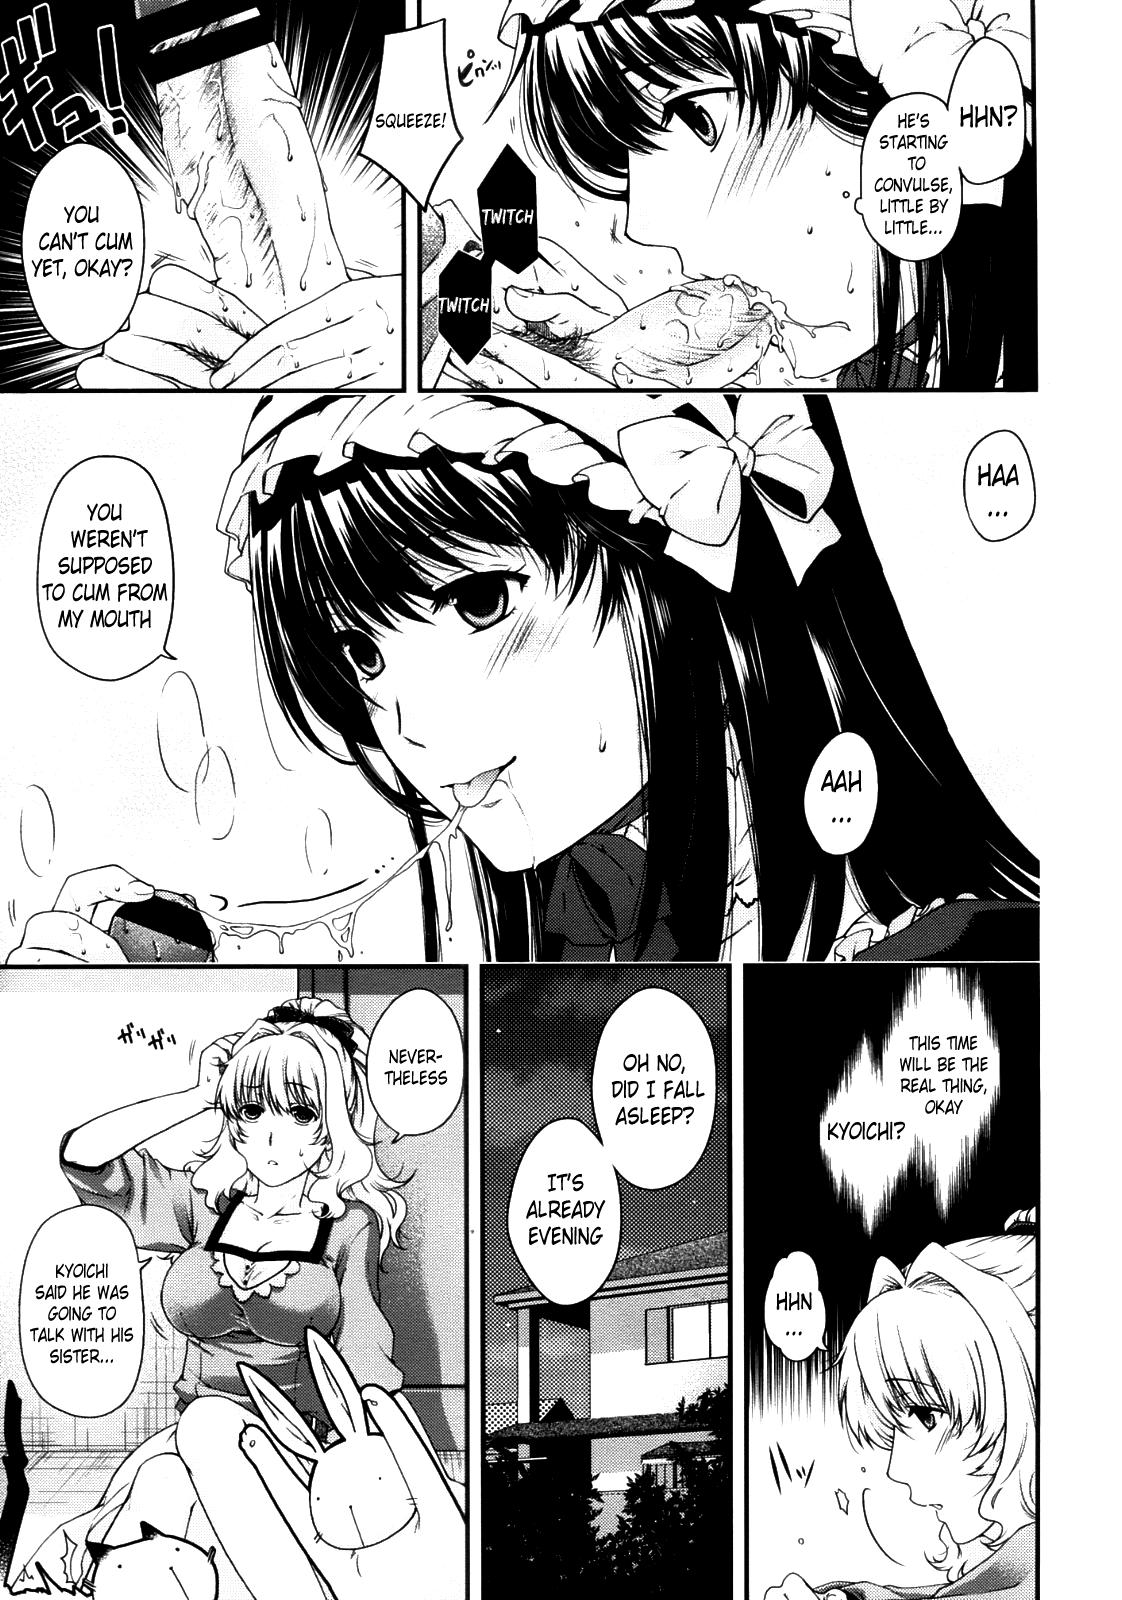 Black Woman Kare to Imouto no Houteishiki | The Equation of Him and His Little Sister Outside - Page 11